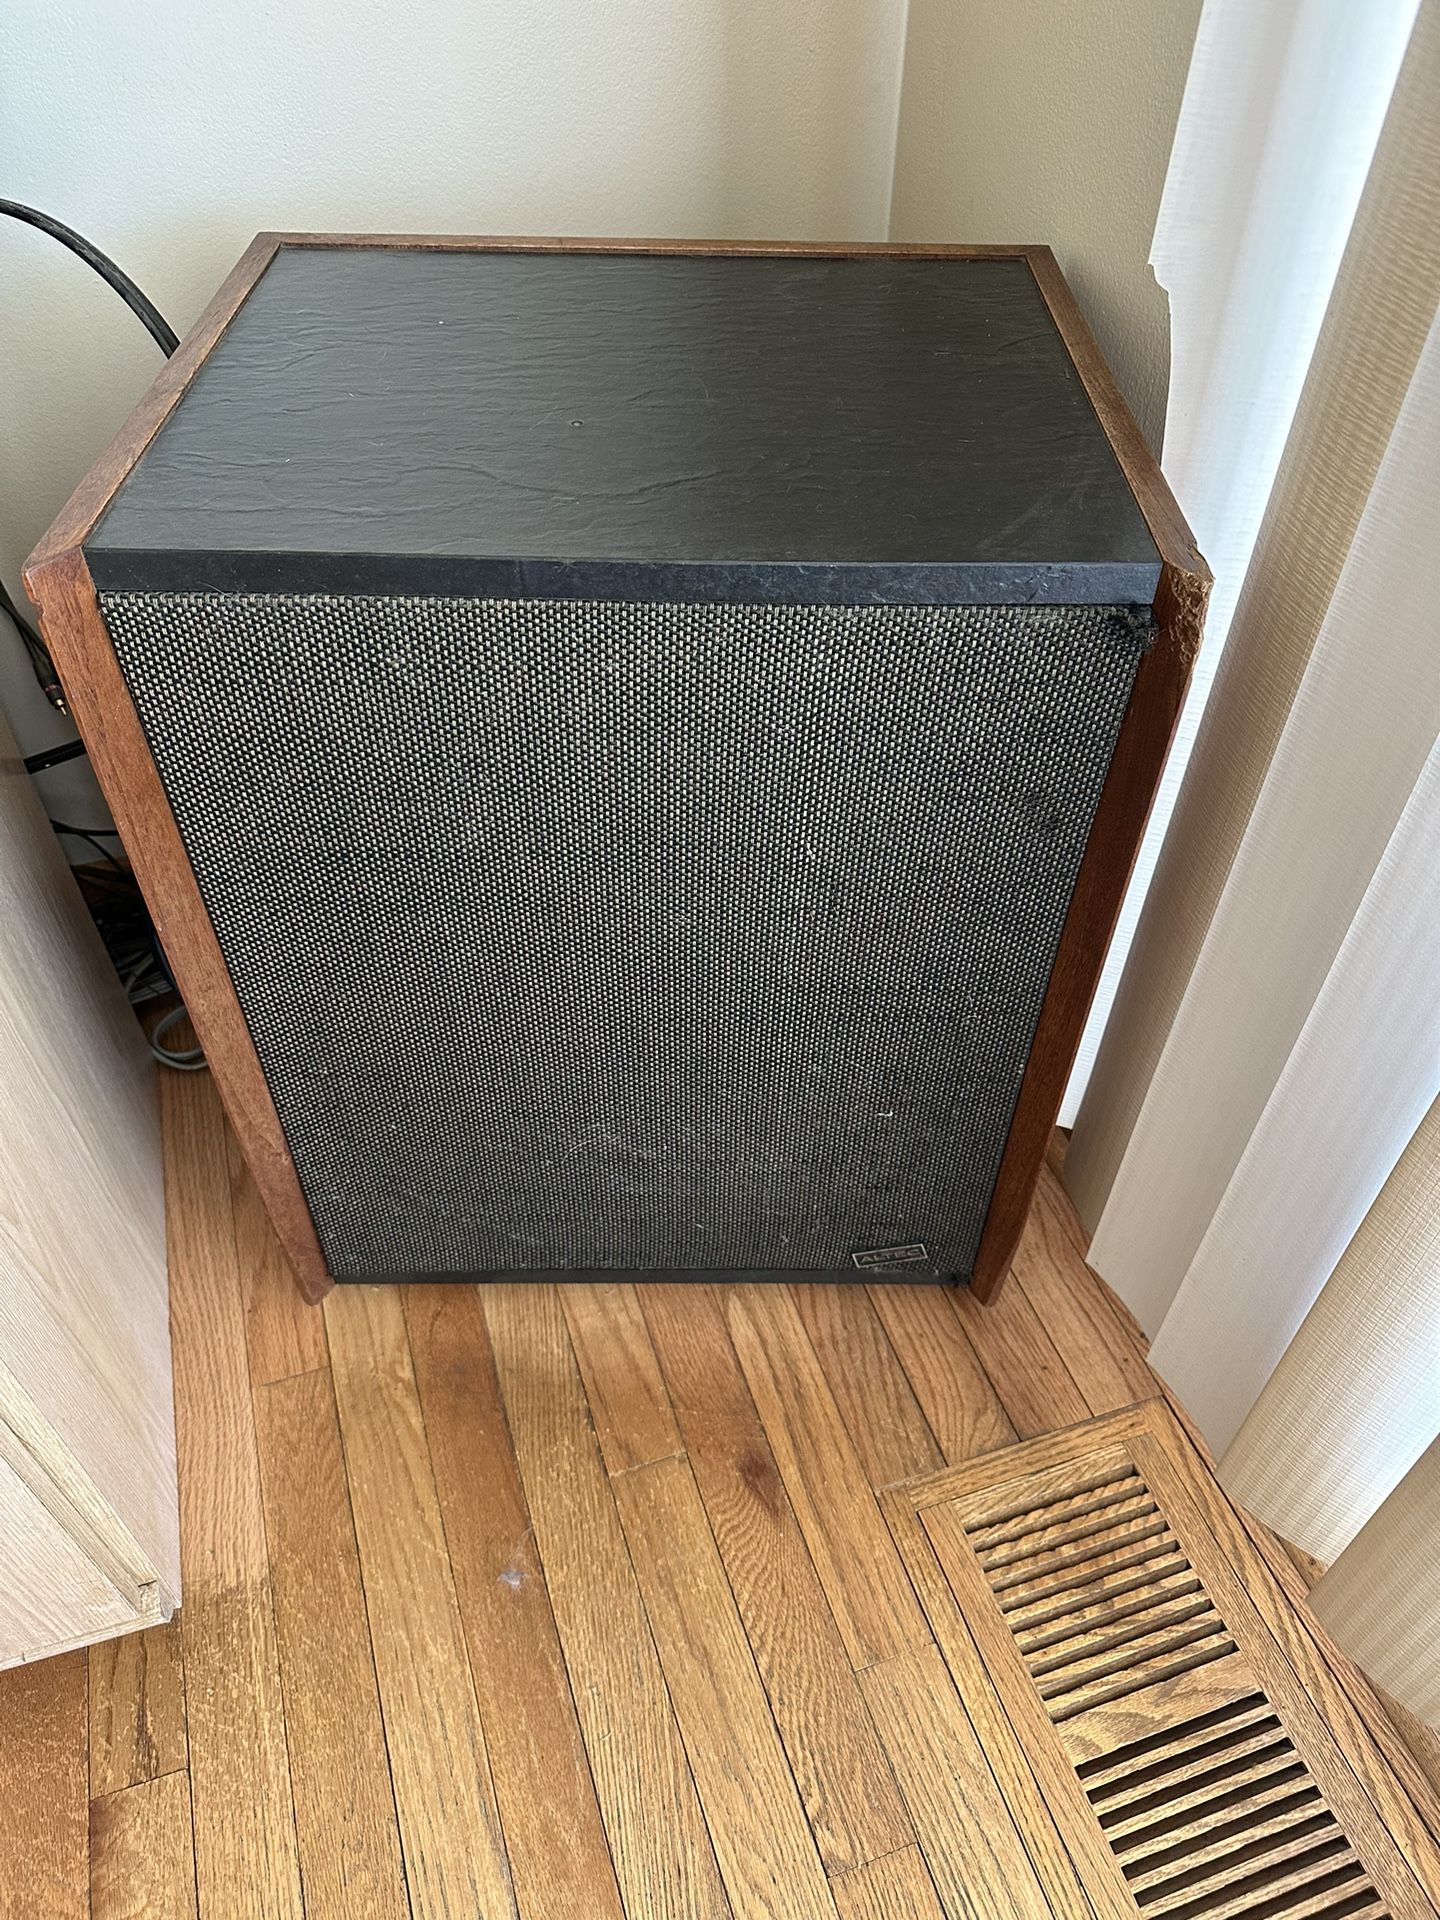 Vintage pair of 2 ALTEC speakers from the 1970’s